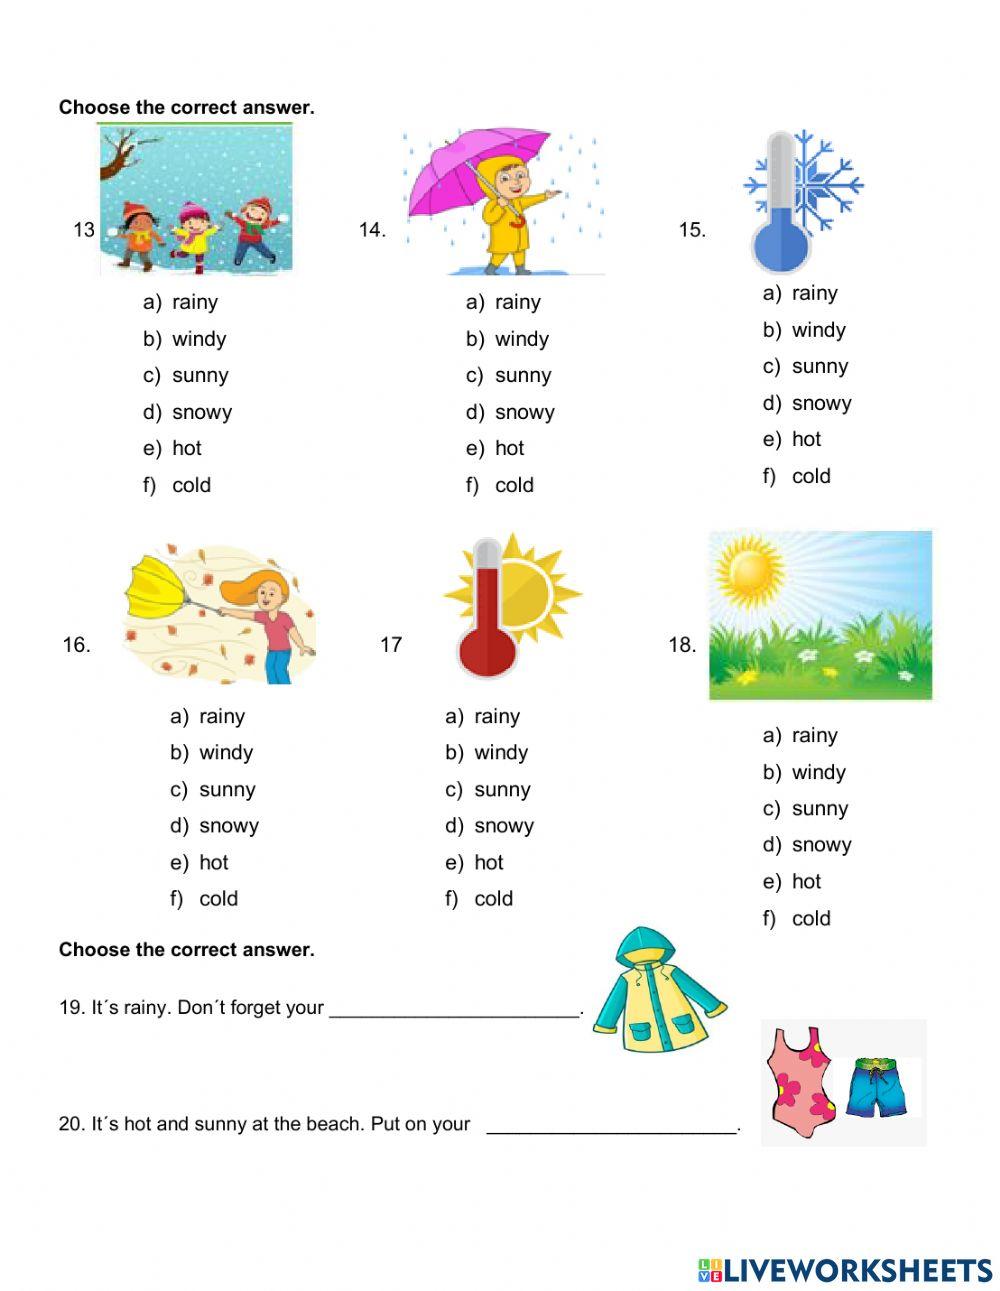 Vocabulary Units 1 and 2